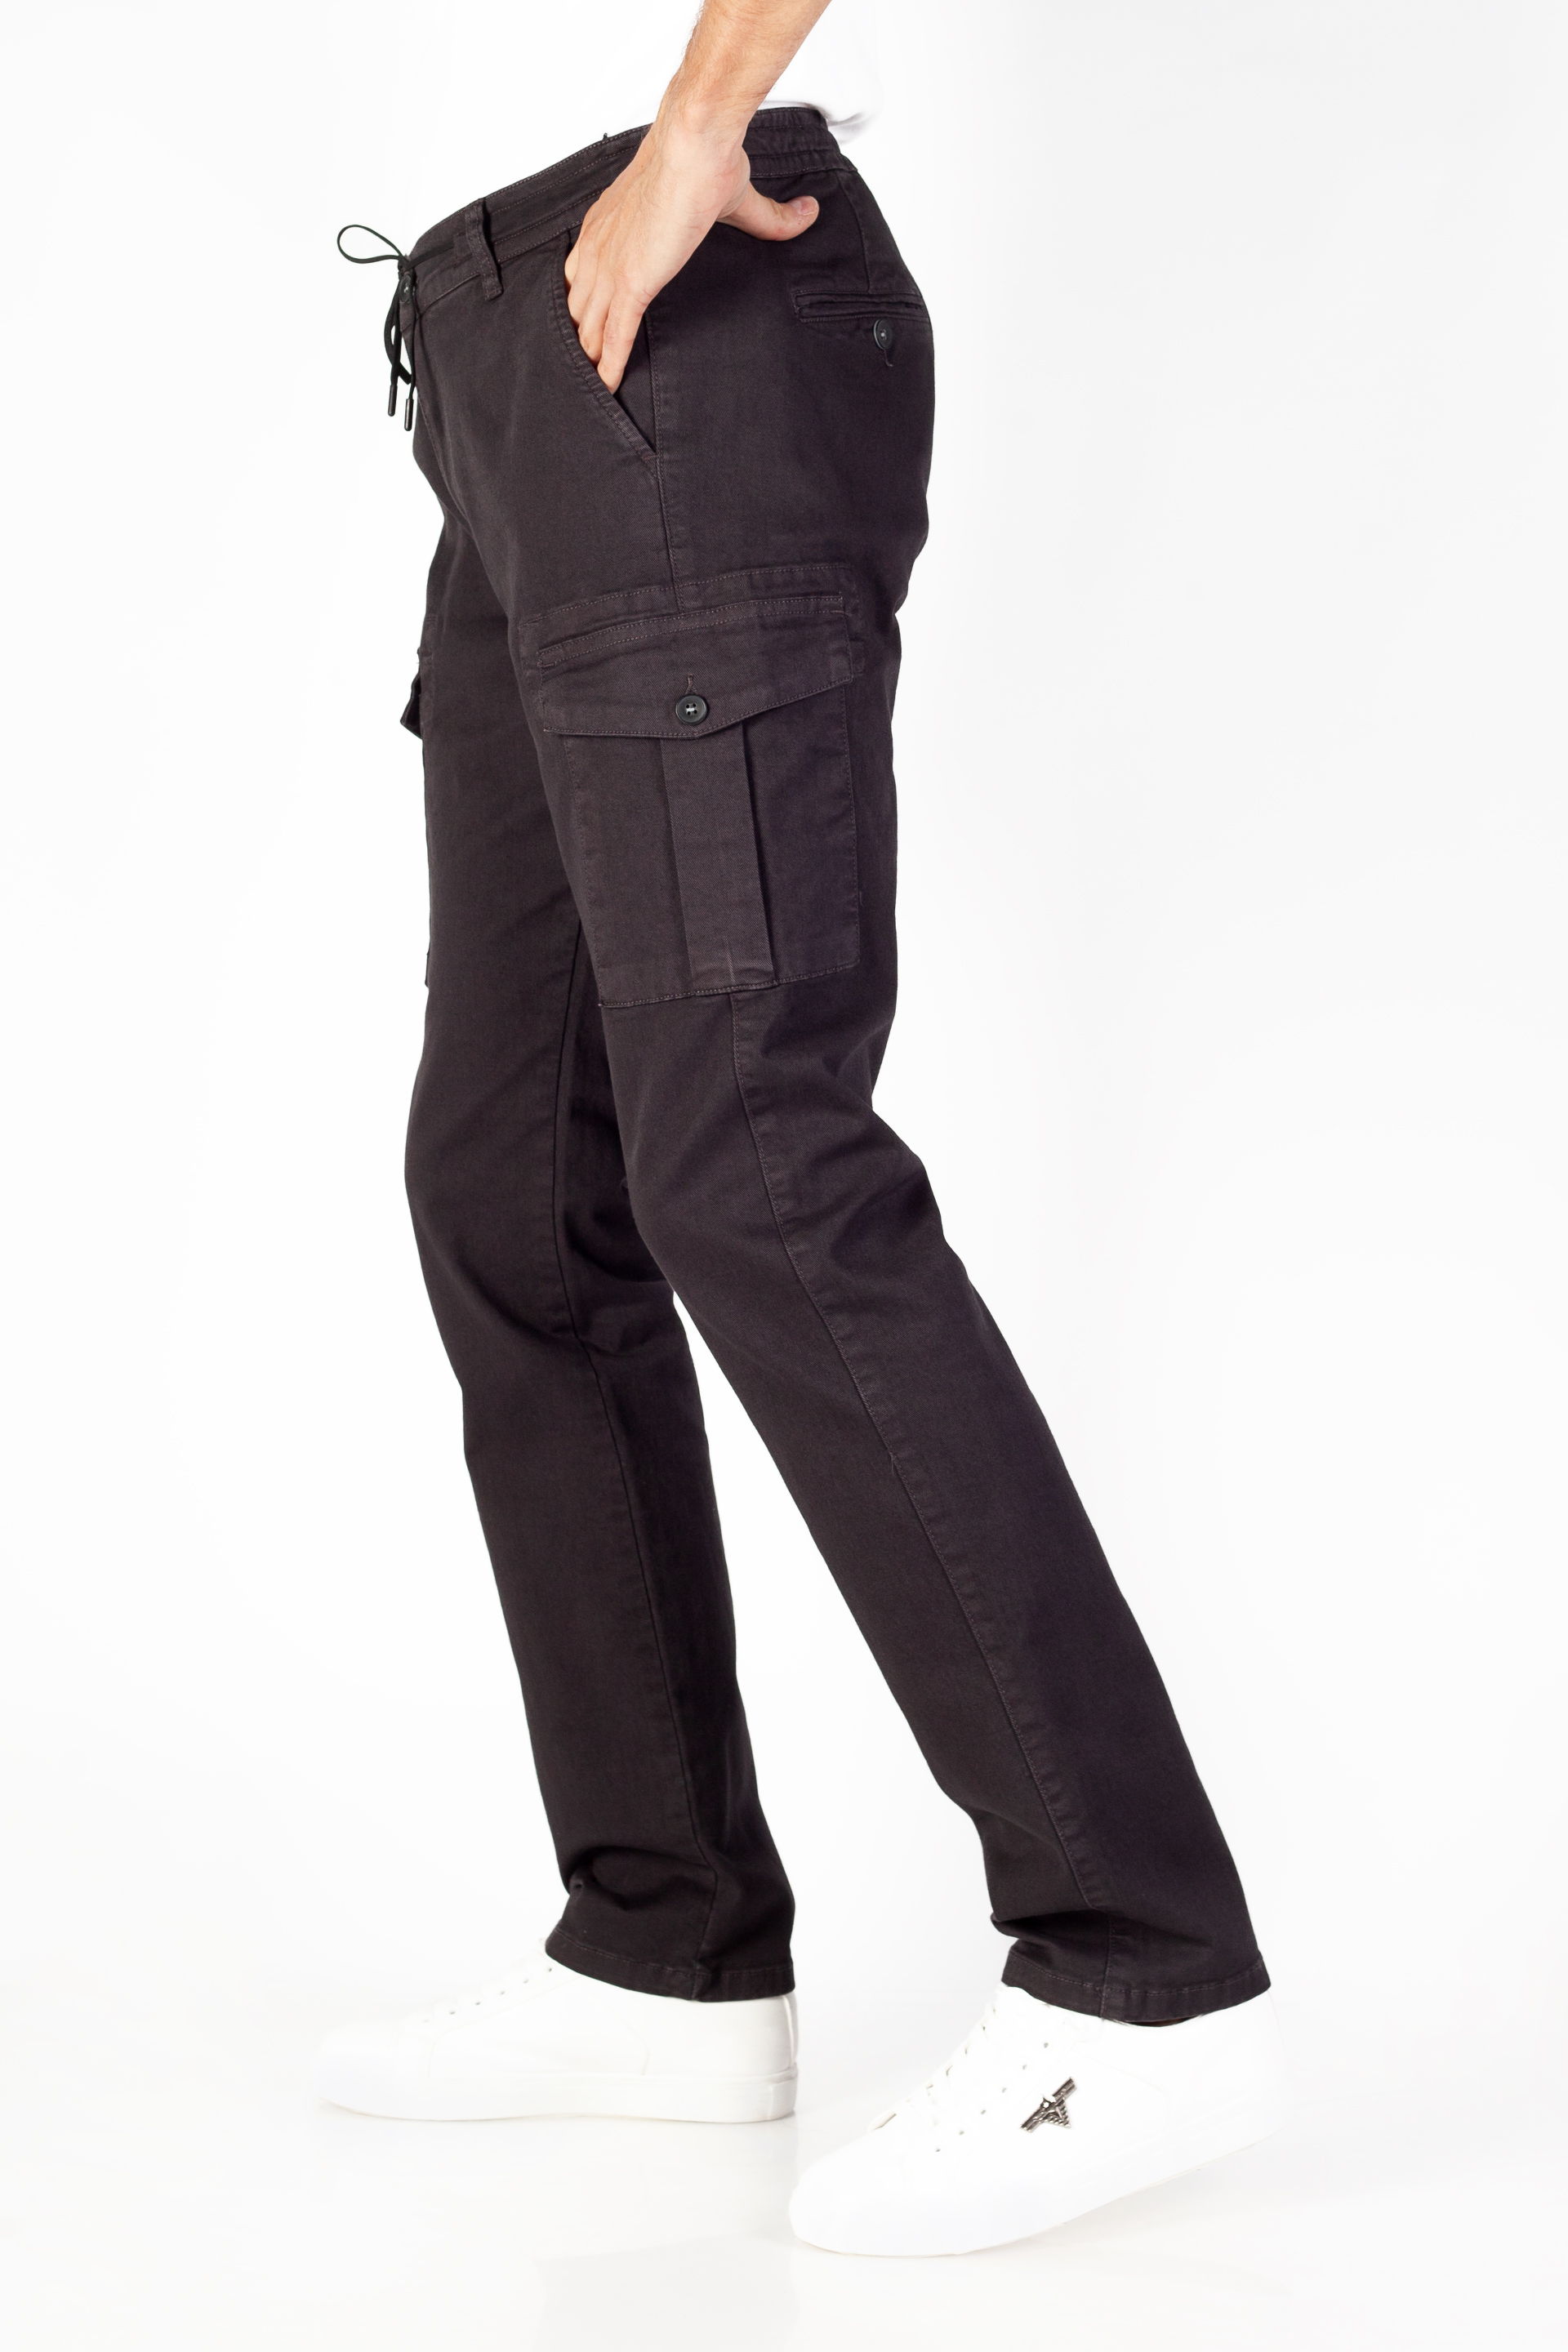 Chino pants BLK JEANS 8401-9020-301-350-ANTRA